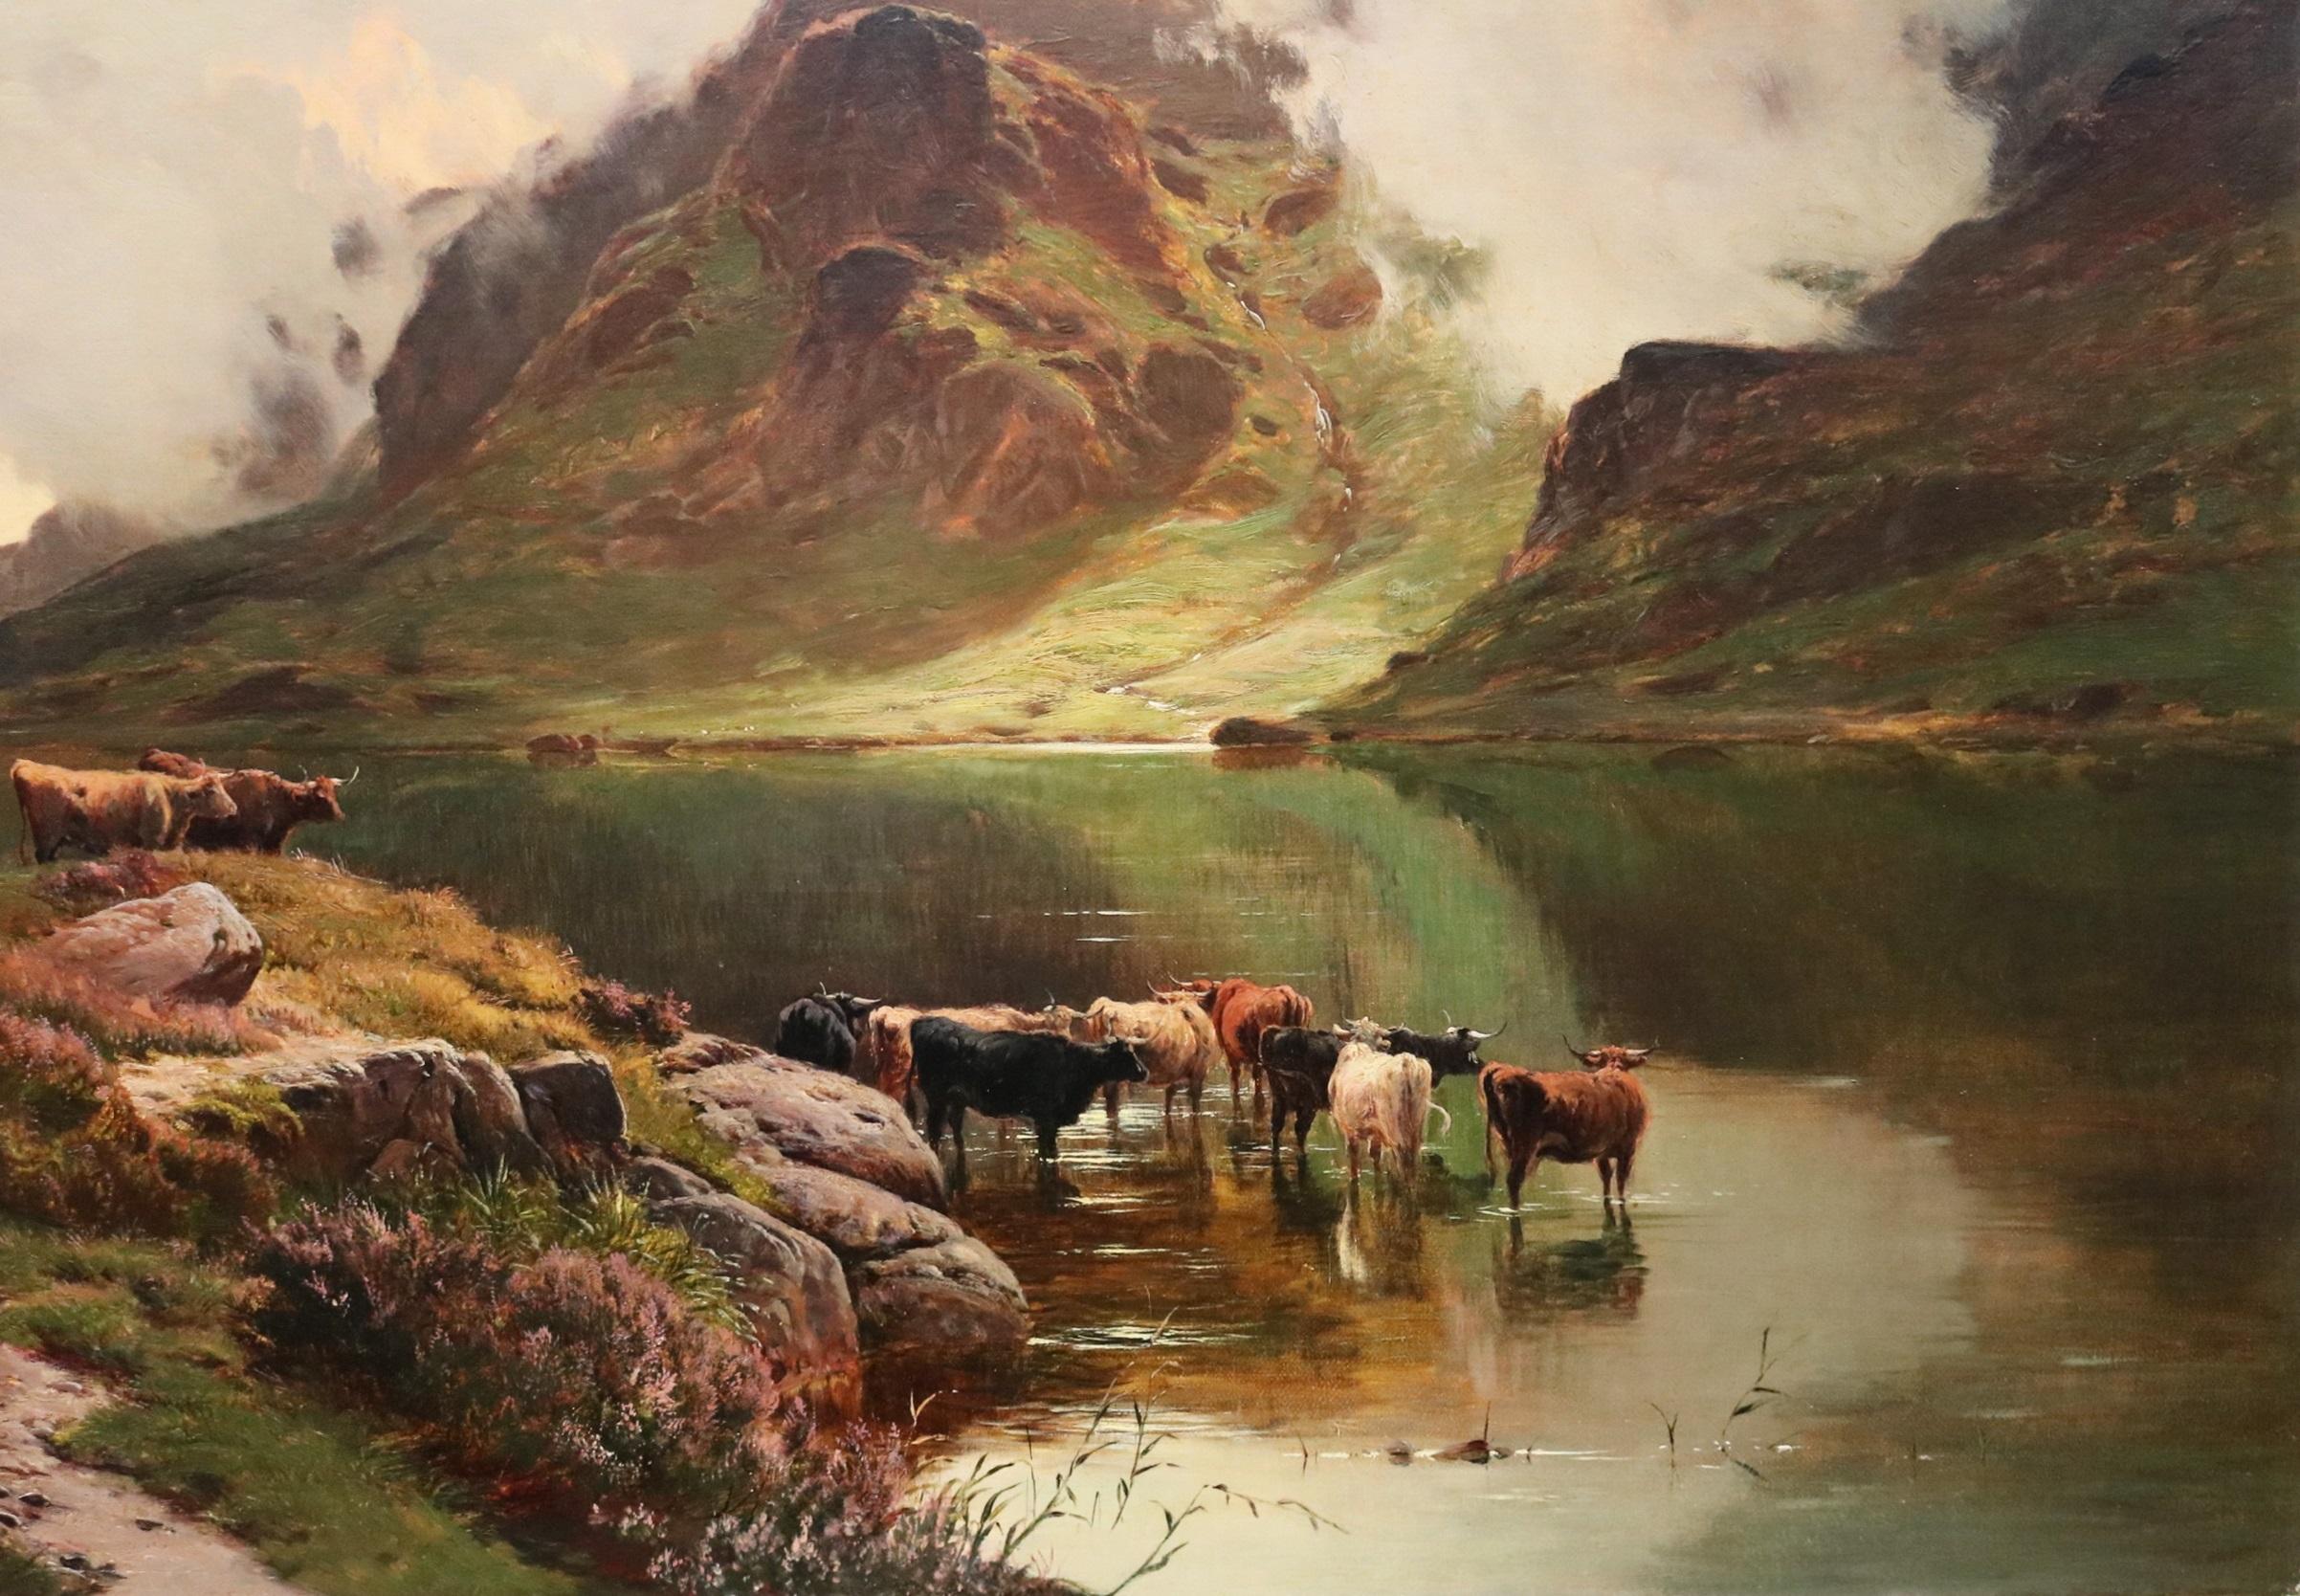 Llyn Idwal, North Wales - Large 19th Century Landscape Oil Painting of Snowdonia 2